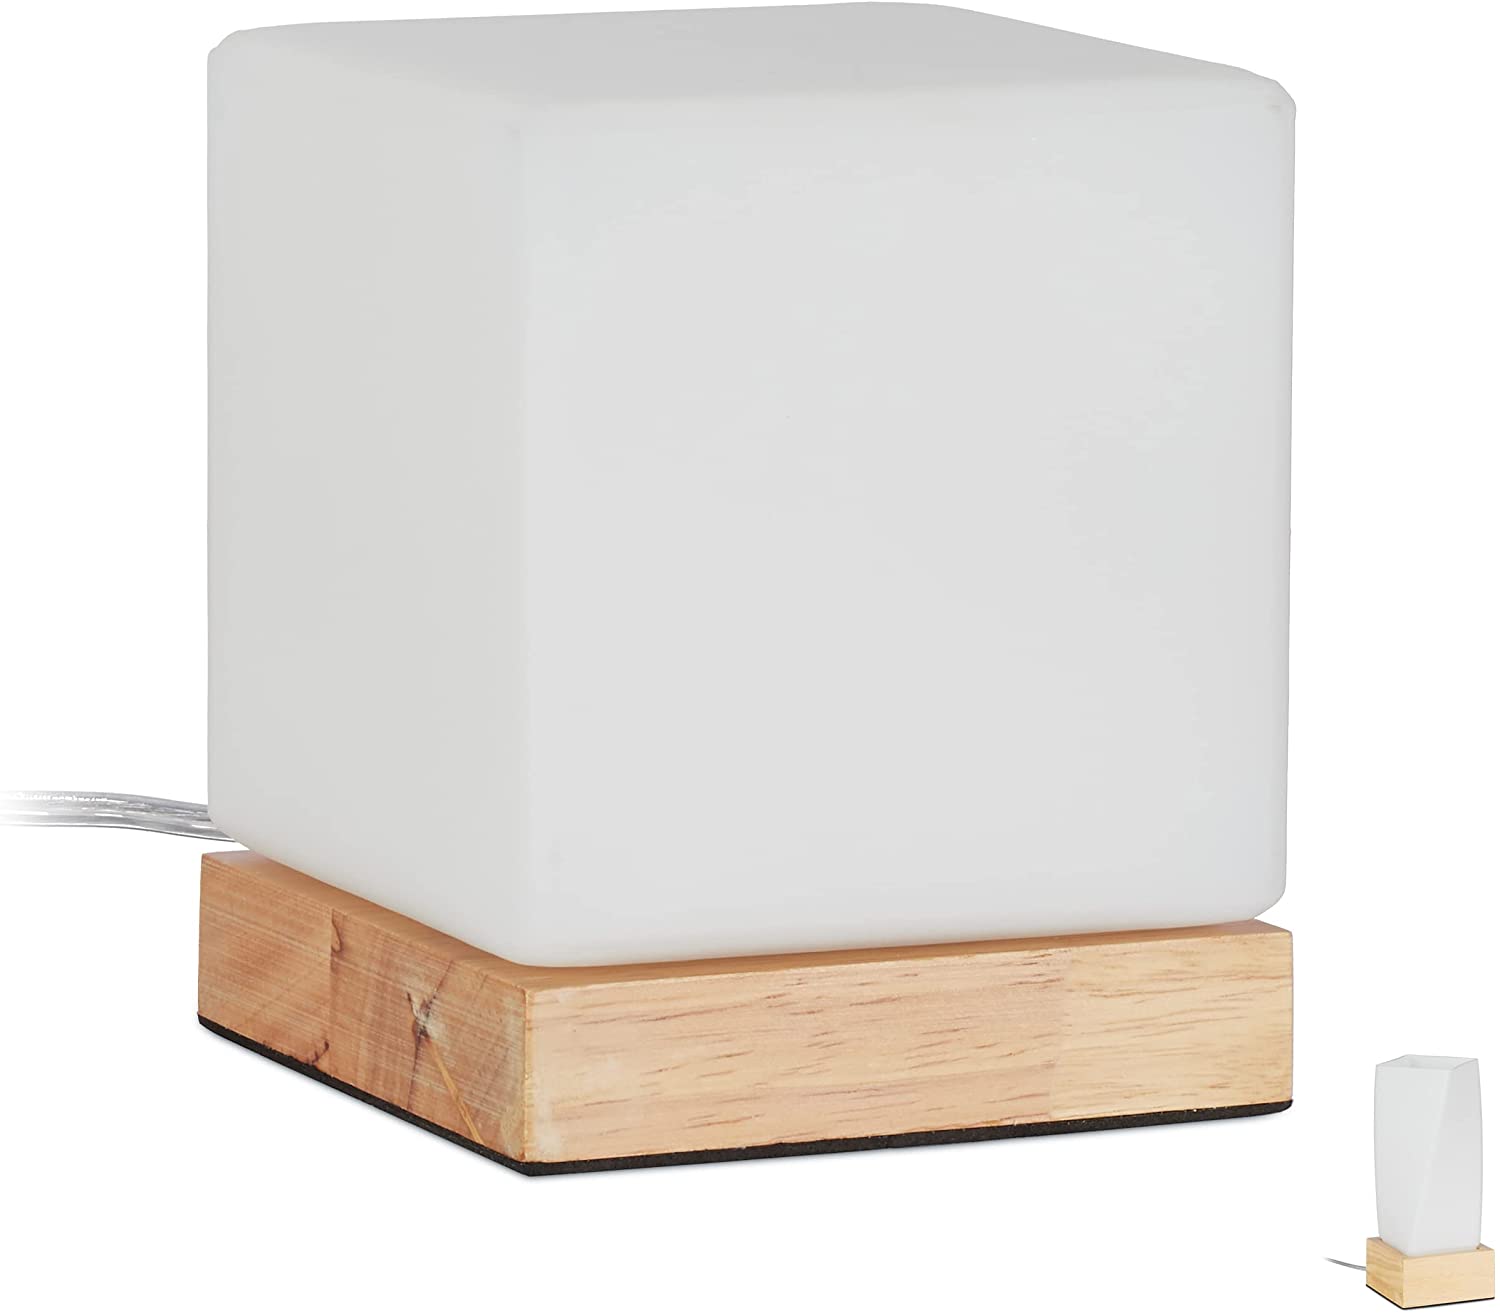 Relaxdays Table Lamp Cube, Living Room & Bedroom, Wood & Frosted Glass, E14 Bedside Lamp, 15 x 12 x 12 cm, White/Natural